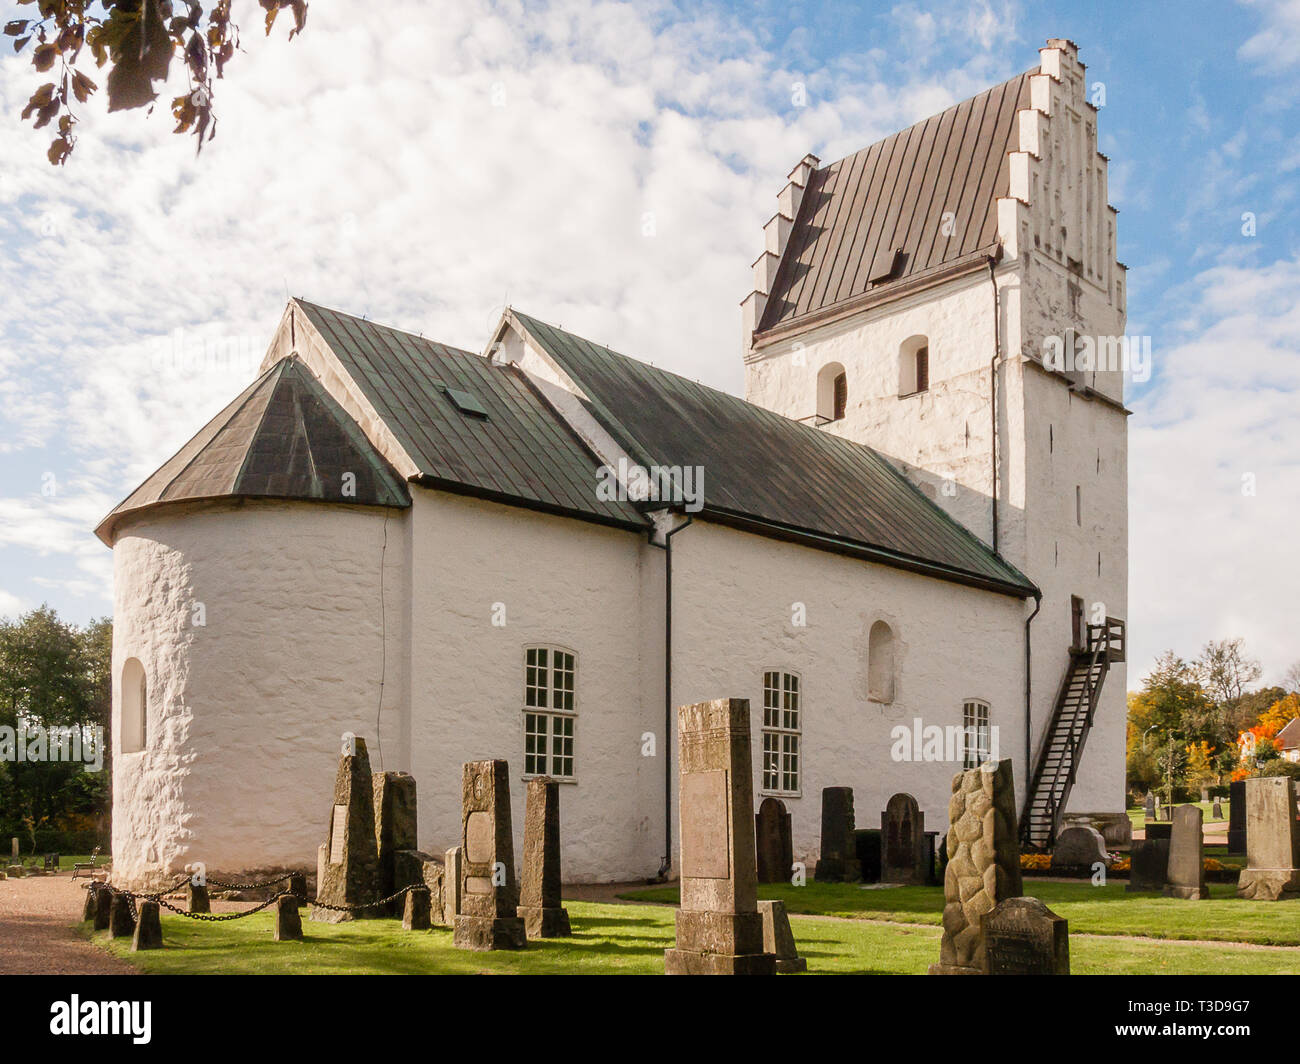 Romanesque church in Sweden with stepped gables. Finja, Oct 07, 2009, Stock Photo